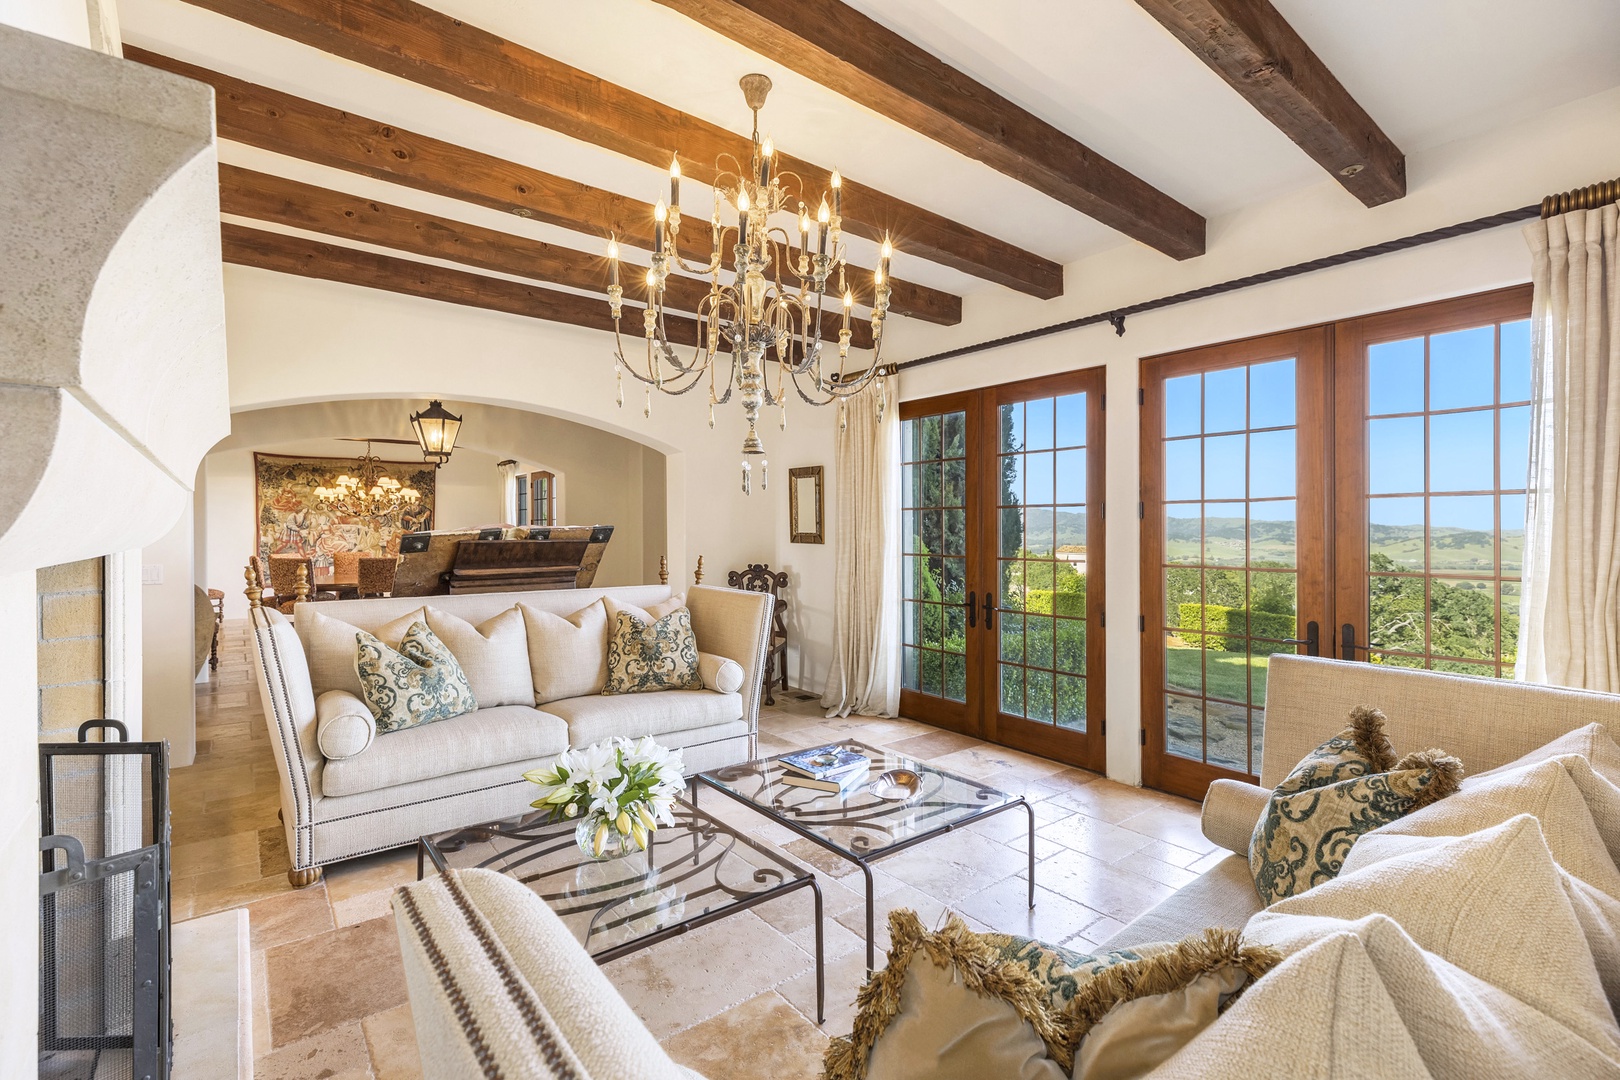 Fairfield Vacation Rentals, Villa Capricho - The formal living room offers comfortable seating and breathtaking views of the vineyards